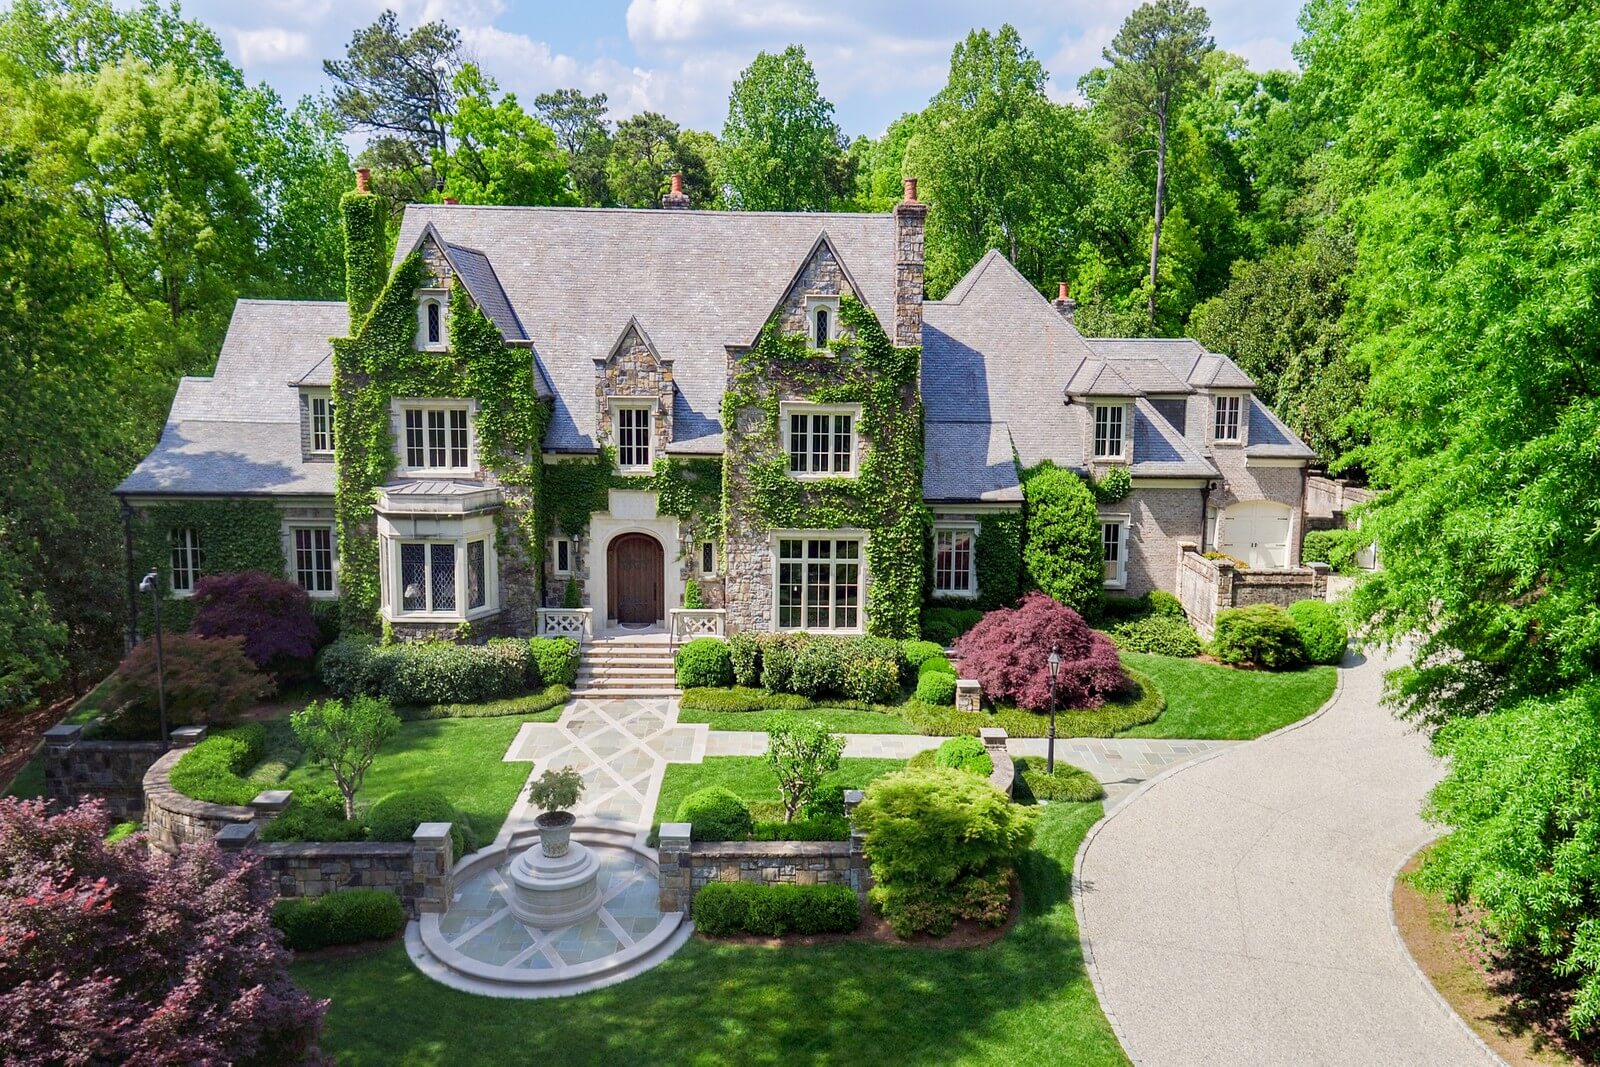 Peek Inside: $5M+ Homes For Sale in The South